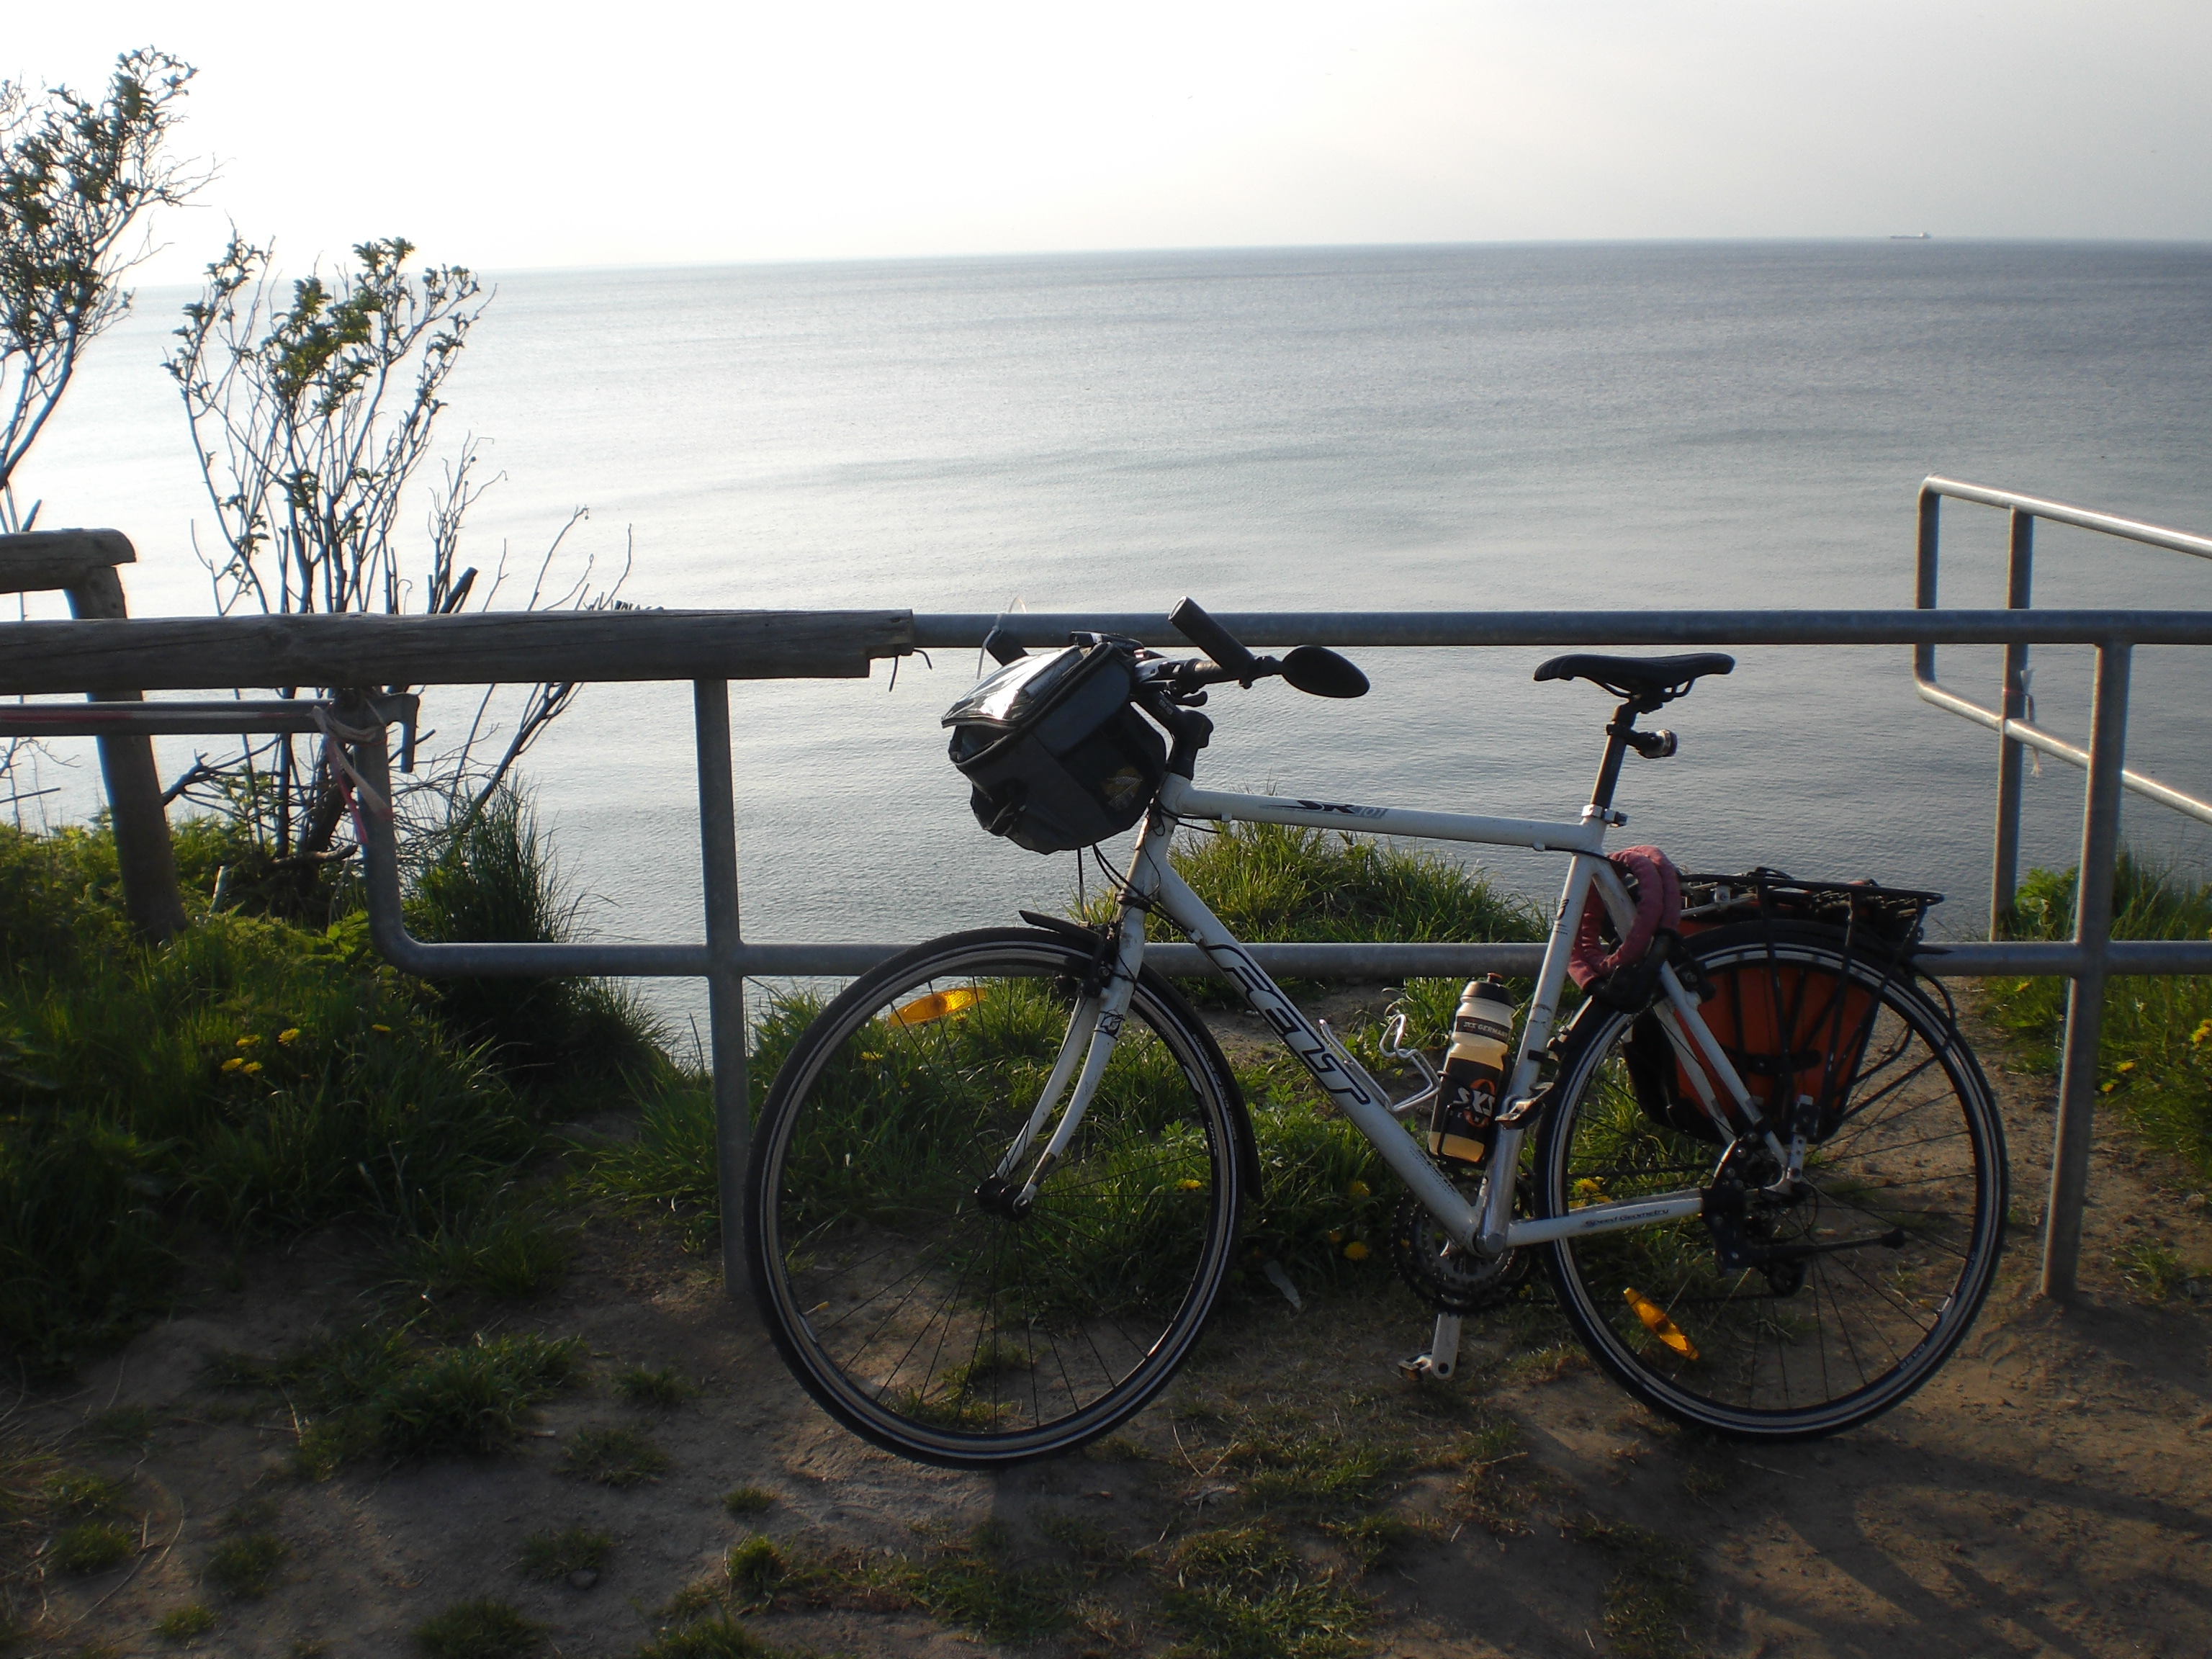 Once you have reached the cliff coast you can park you bike and enjoy the view